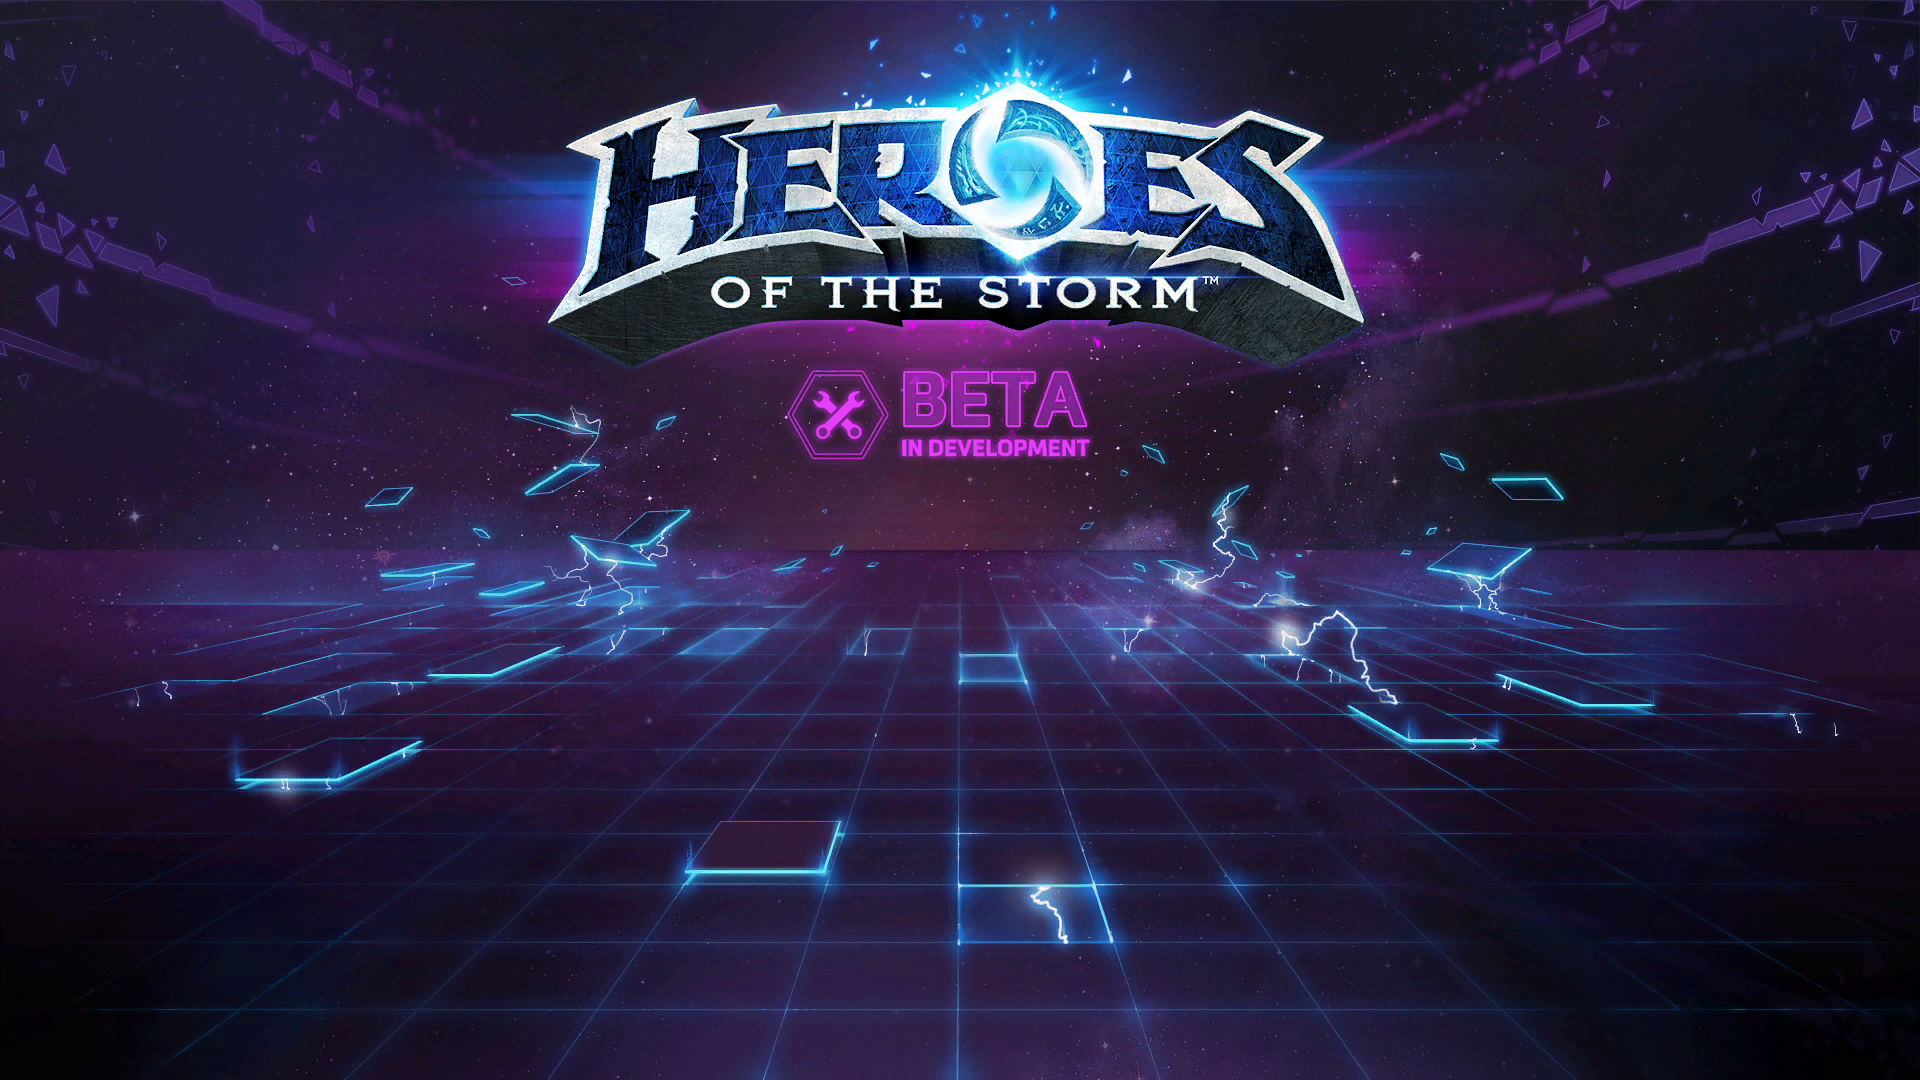 General 1920x1080 Heroes of the Storm Blizzard Entertainment PC gaming digital art